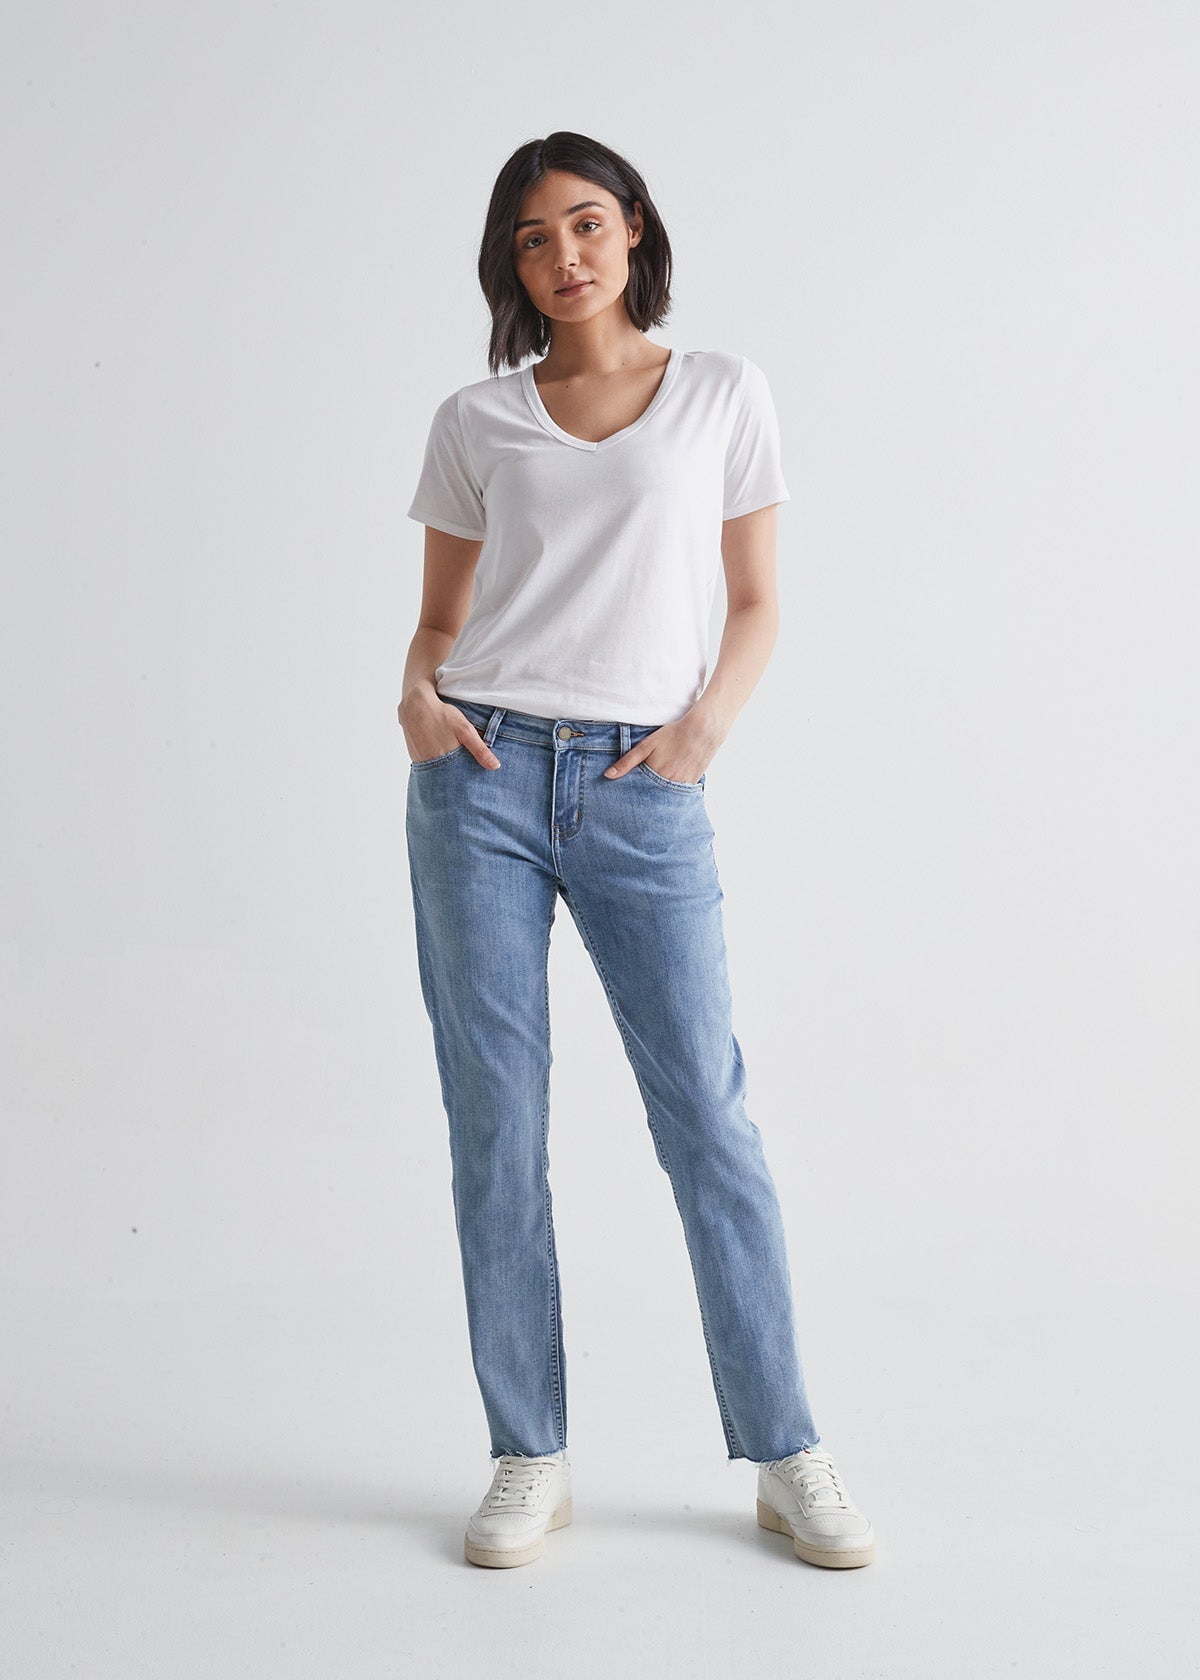 Women's Light Wash Raw Hem Relaxed Fit Stretch Jeans Full Body